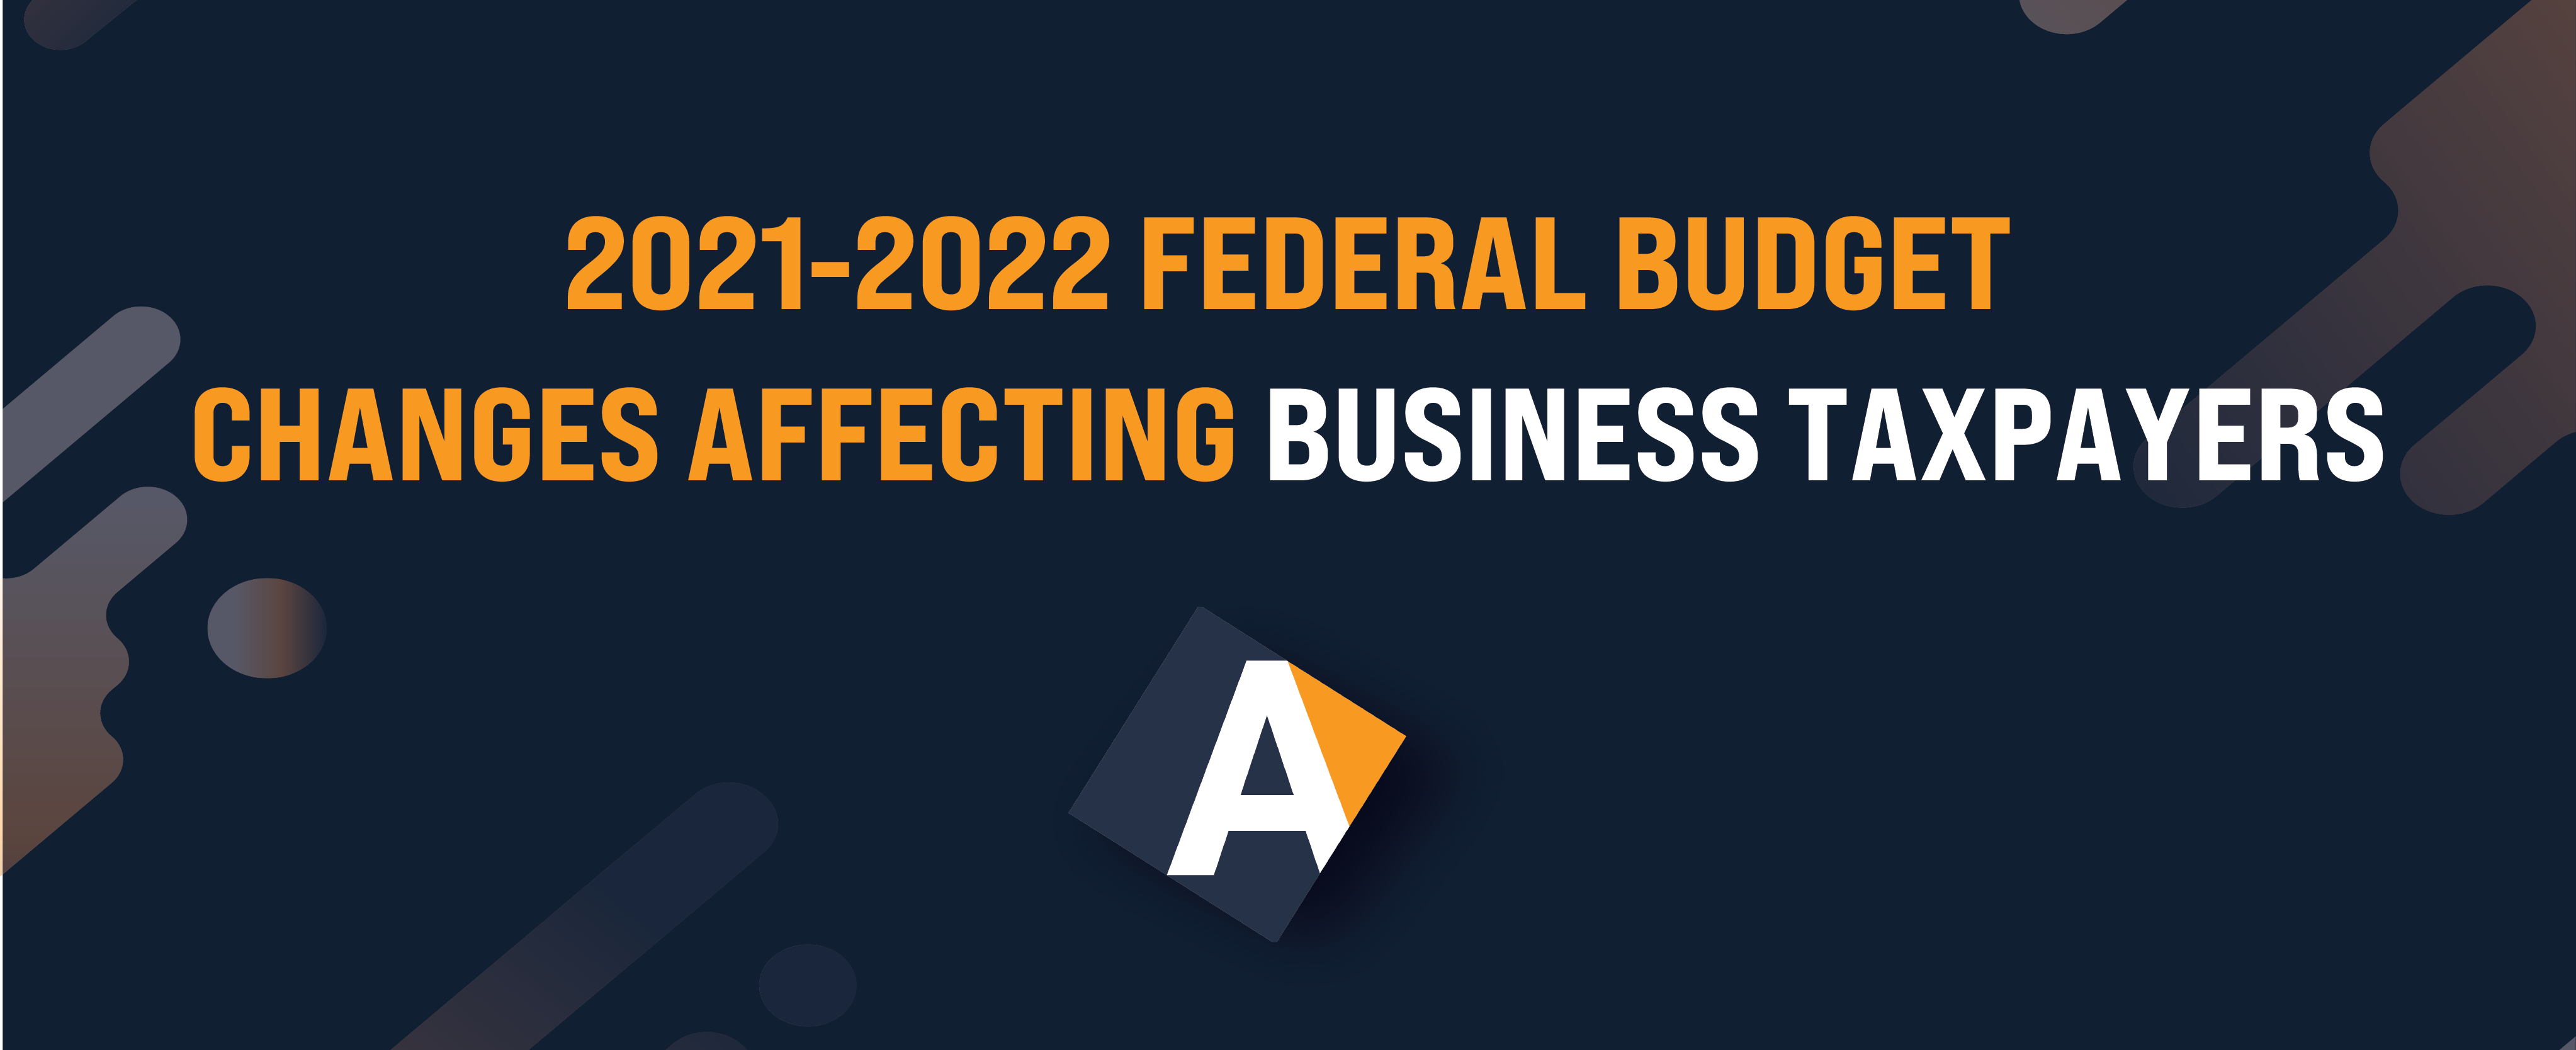 federal-budget-business-taxpeyers